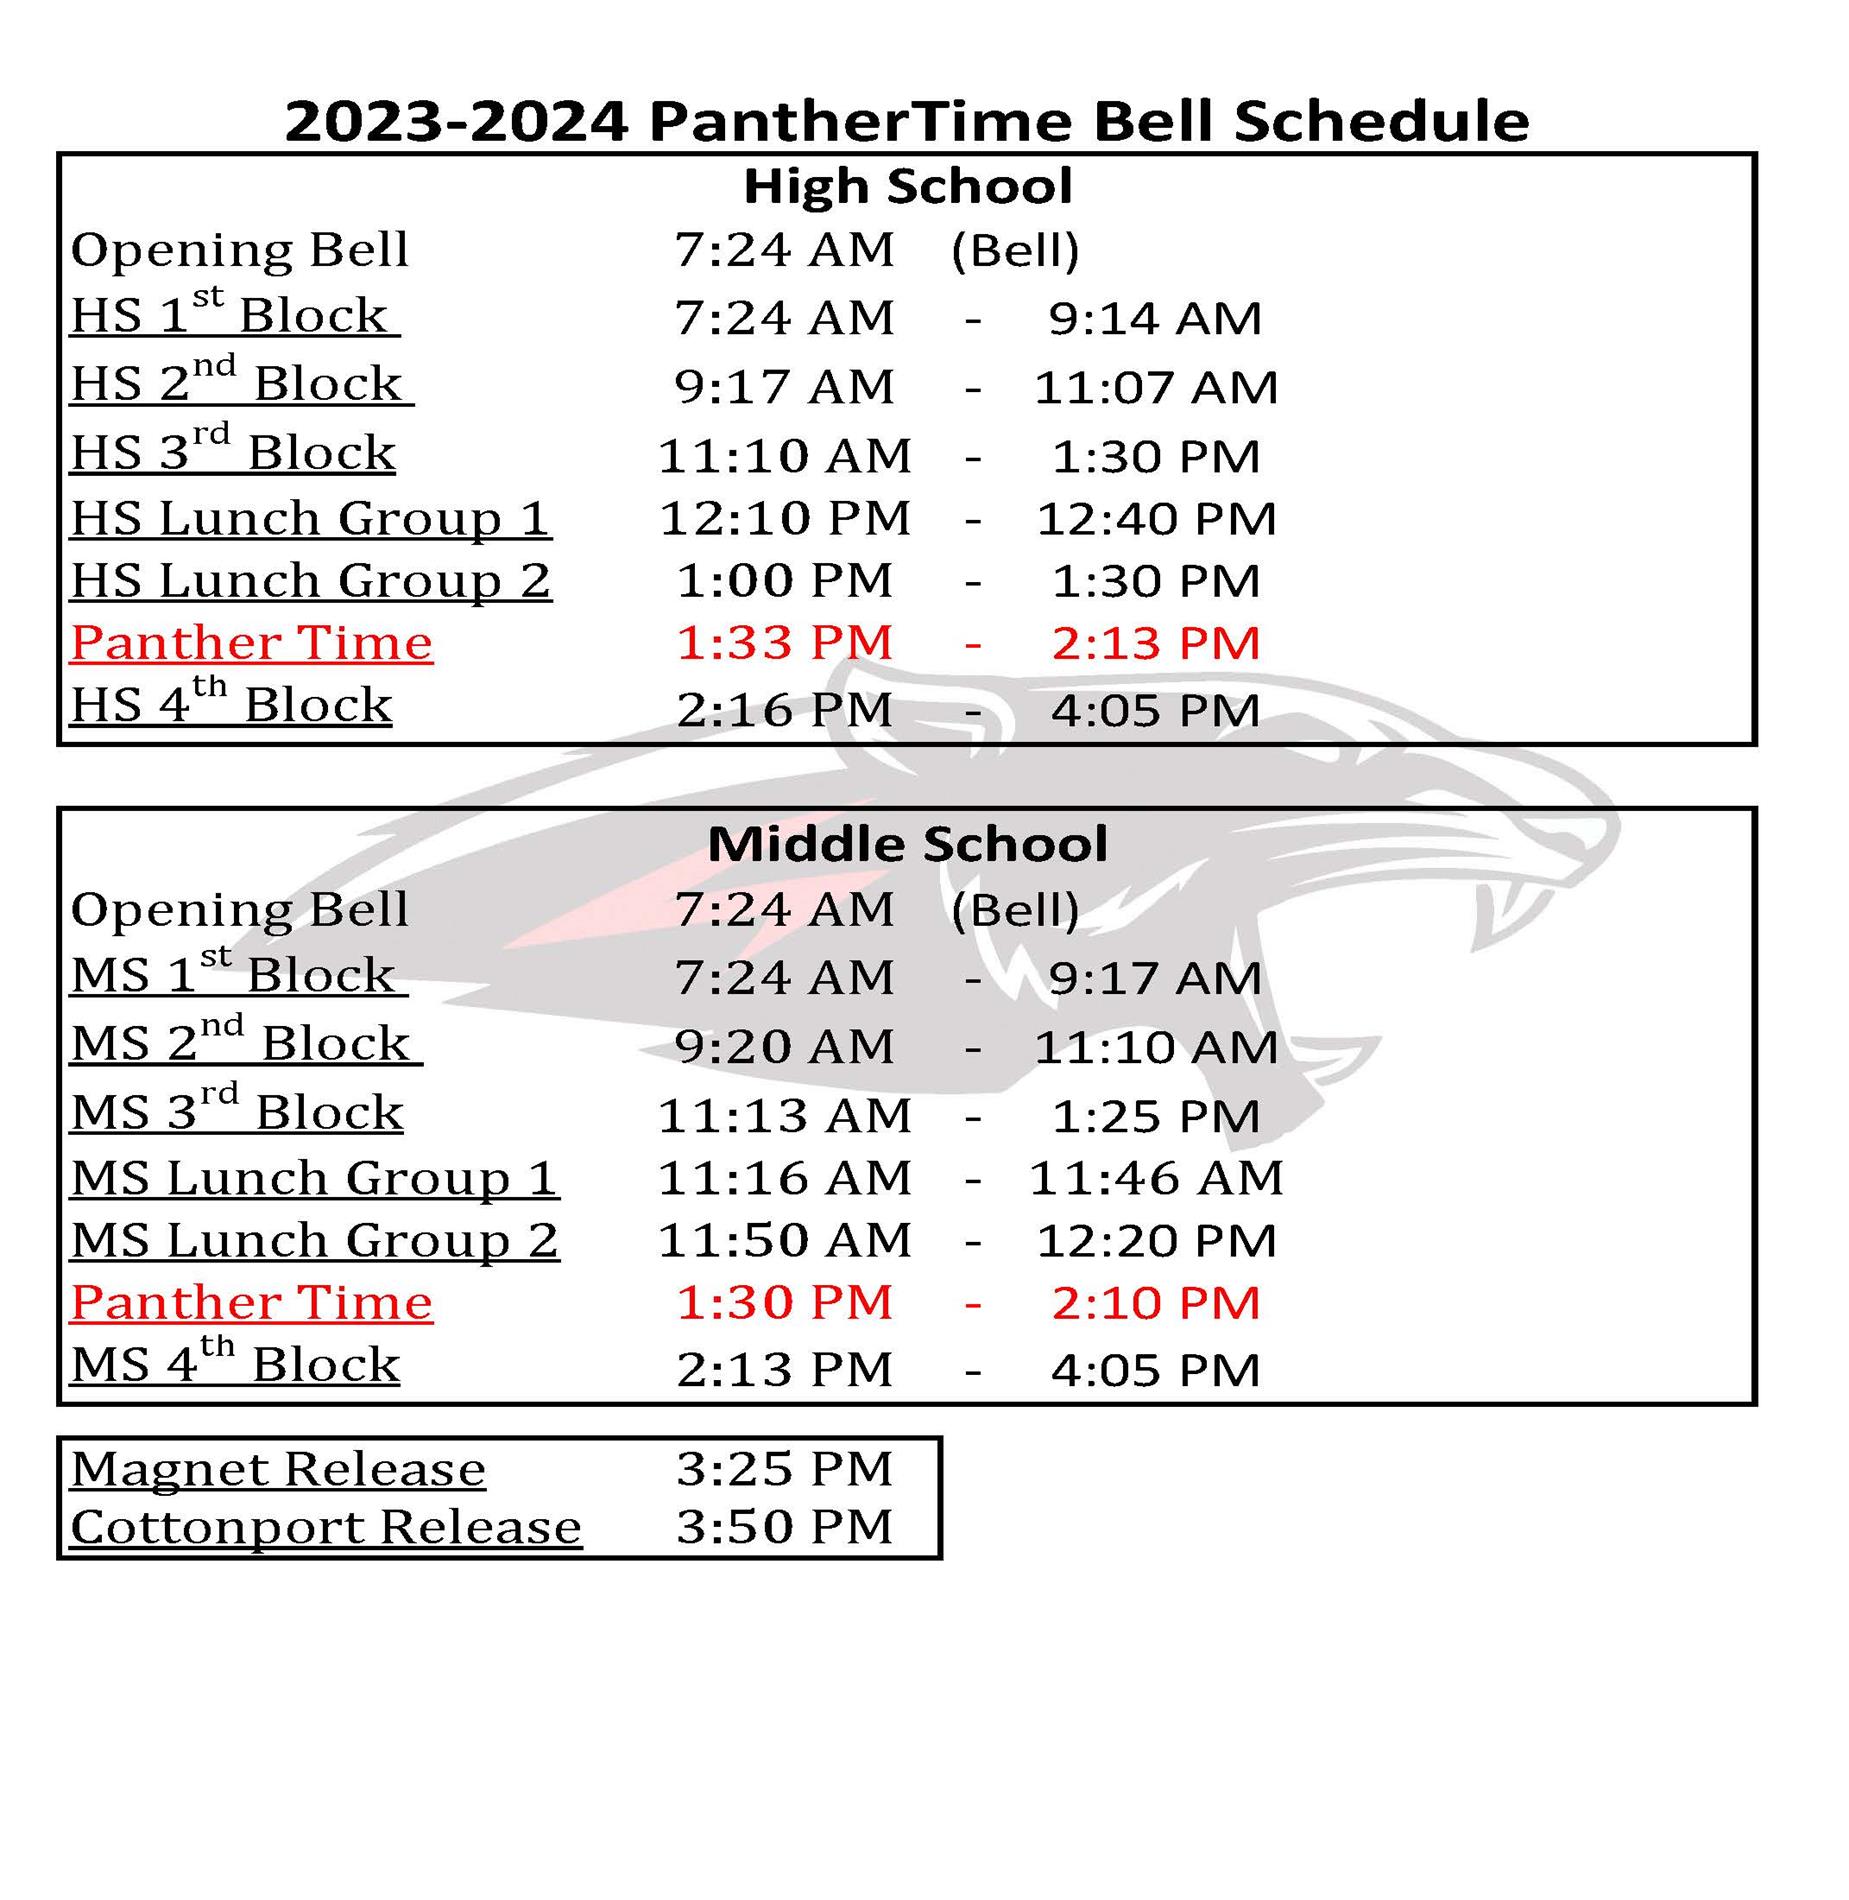 2023-2024 PantherTime Bell Schedule